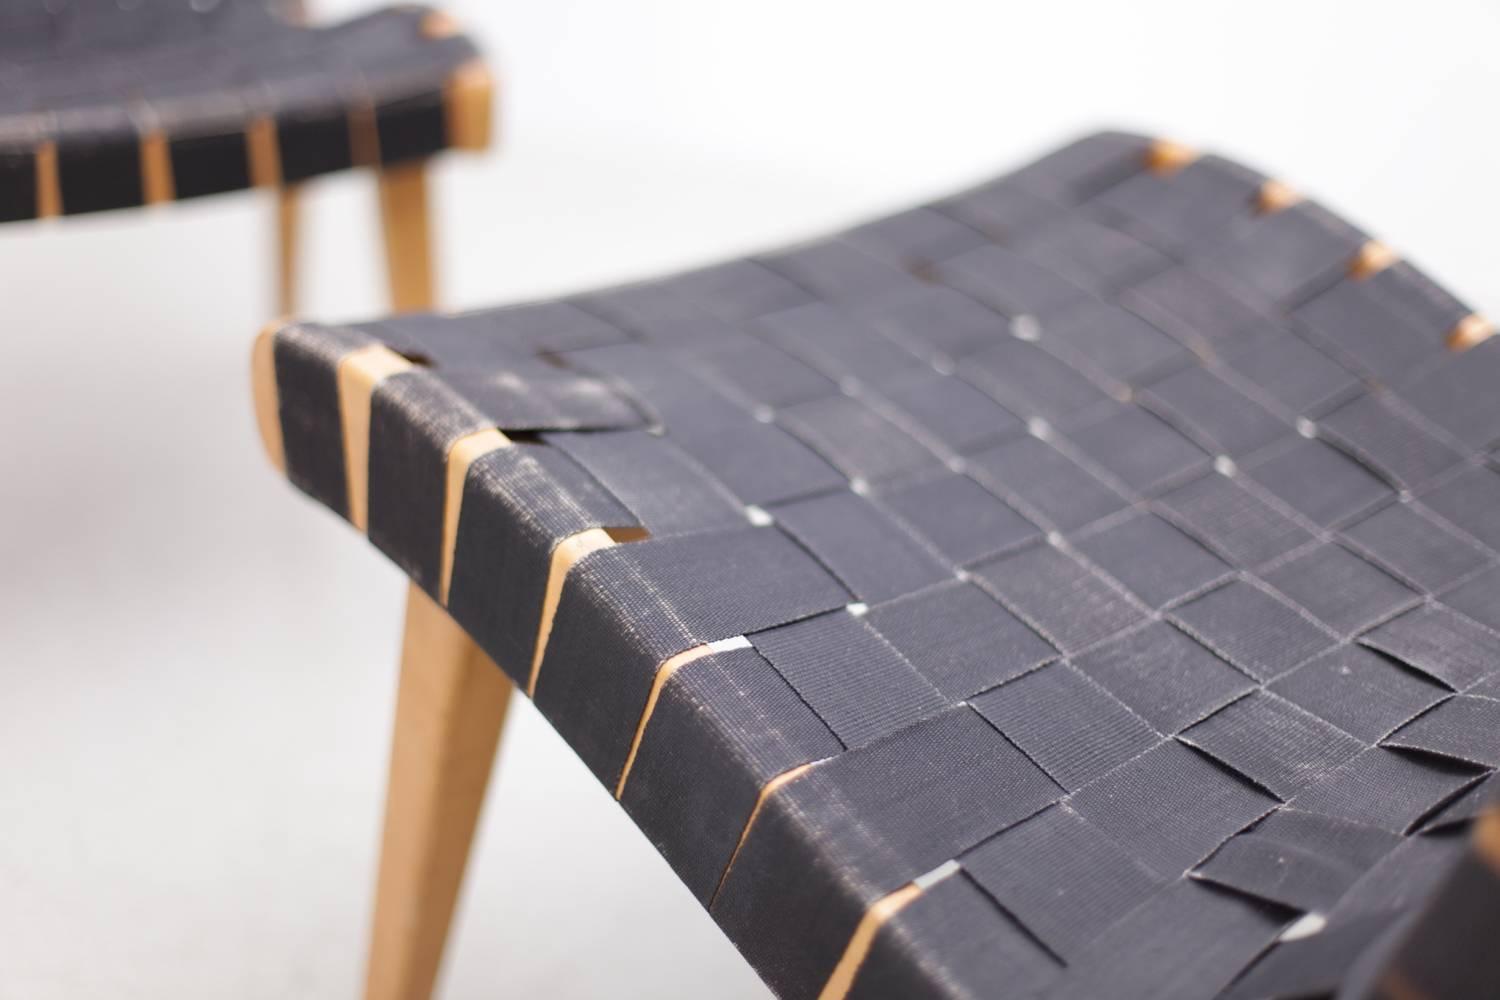 German Pair of Matched Jens Risom Lounge Chairs in Black Webbing for Knoll